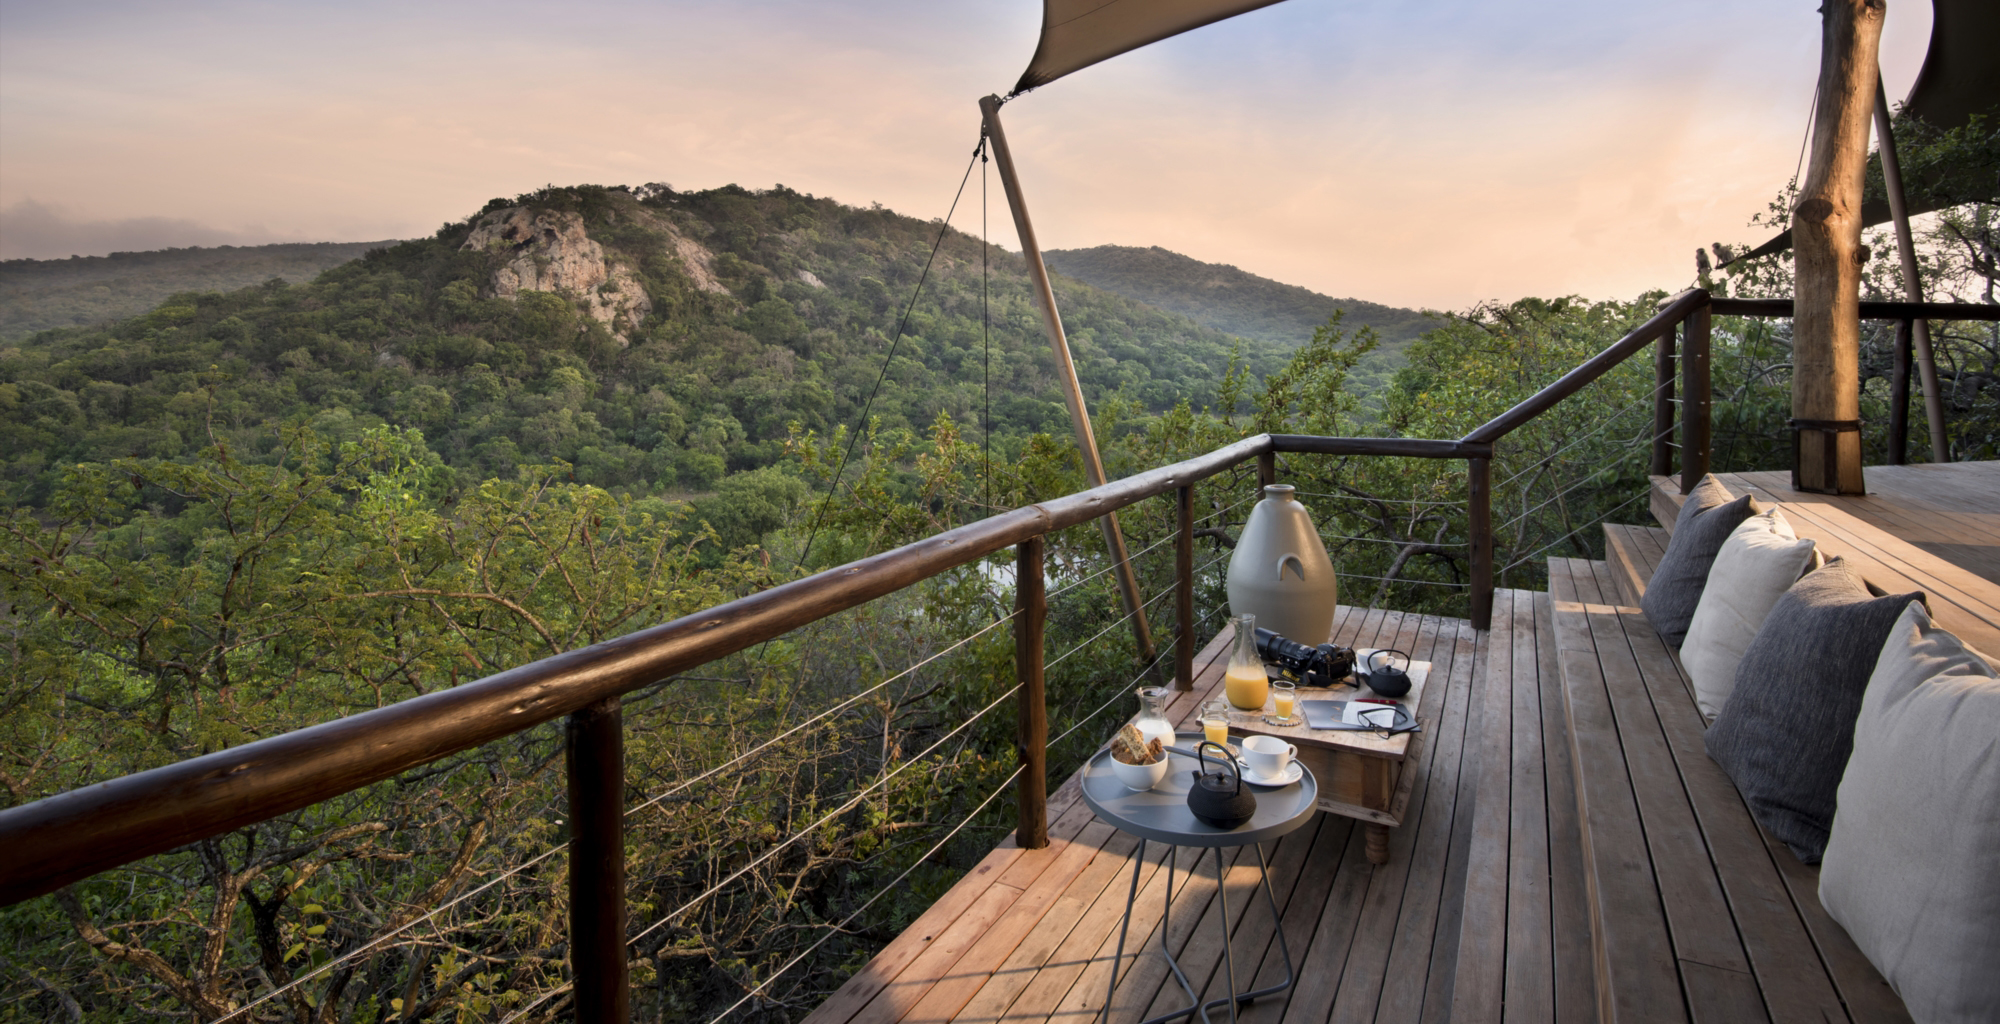 South-Africa-Phinda-Rock-Lodge-Deck-View